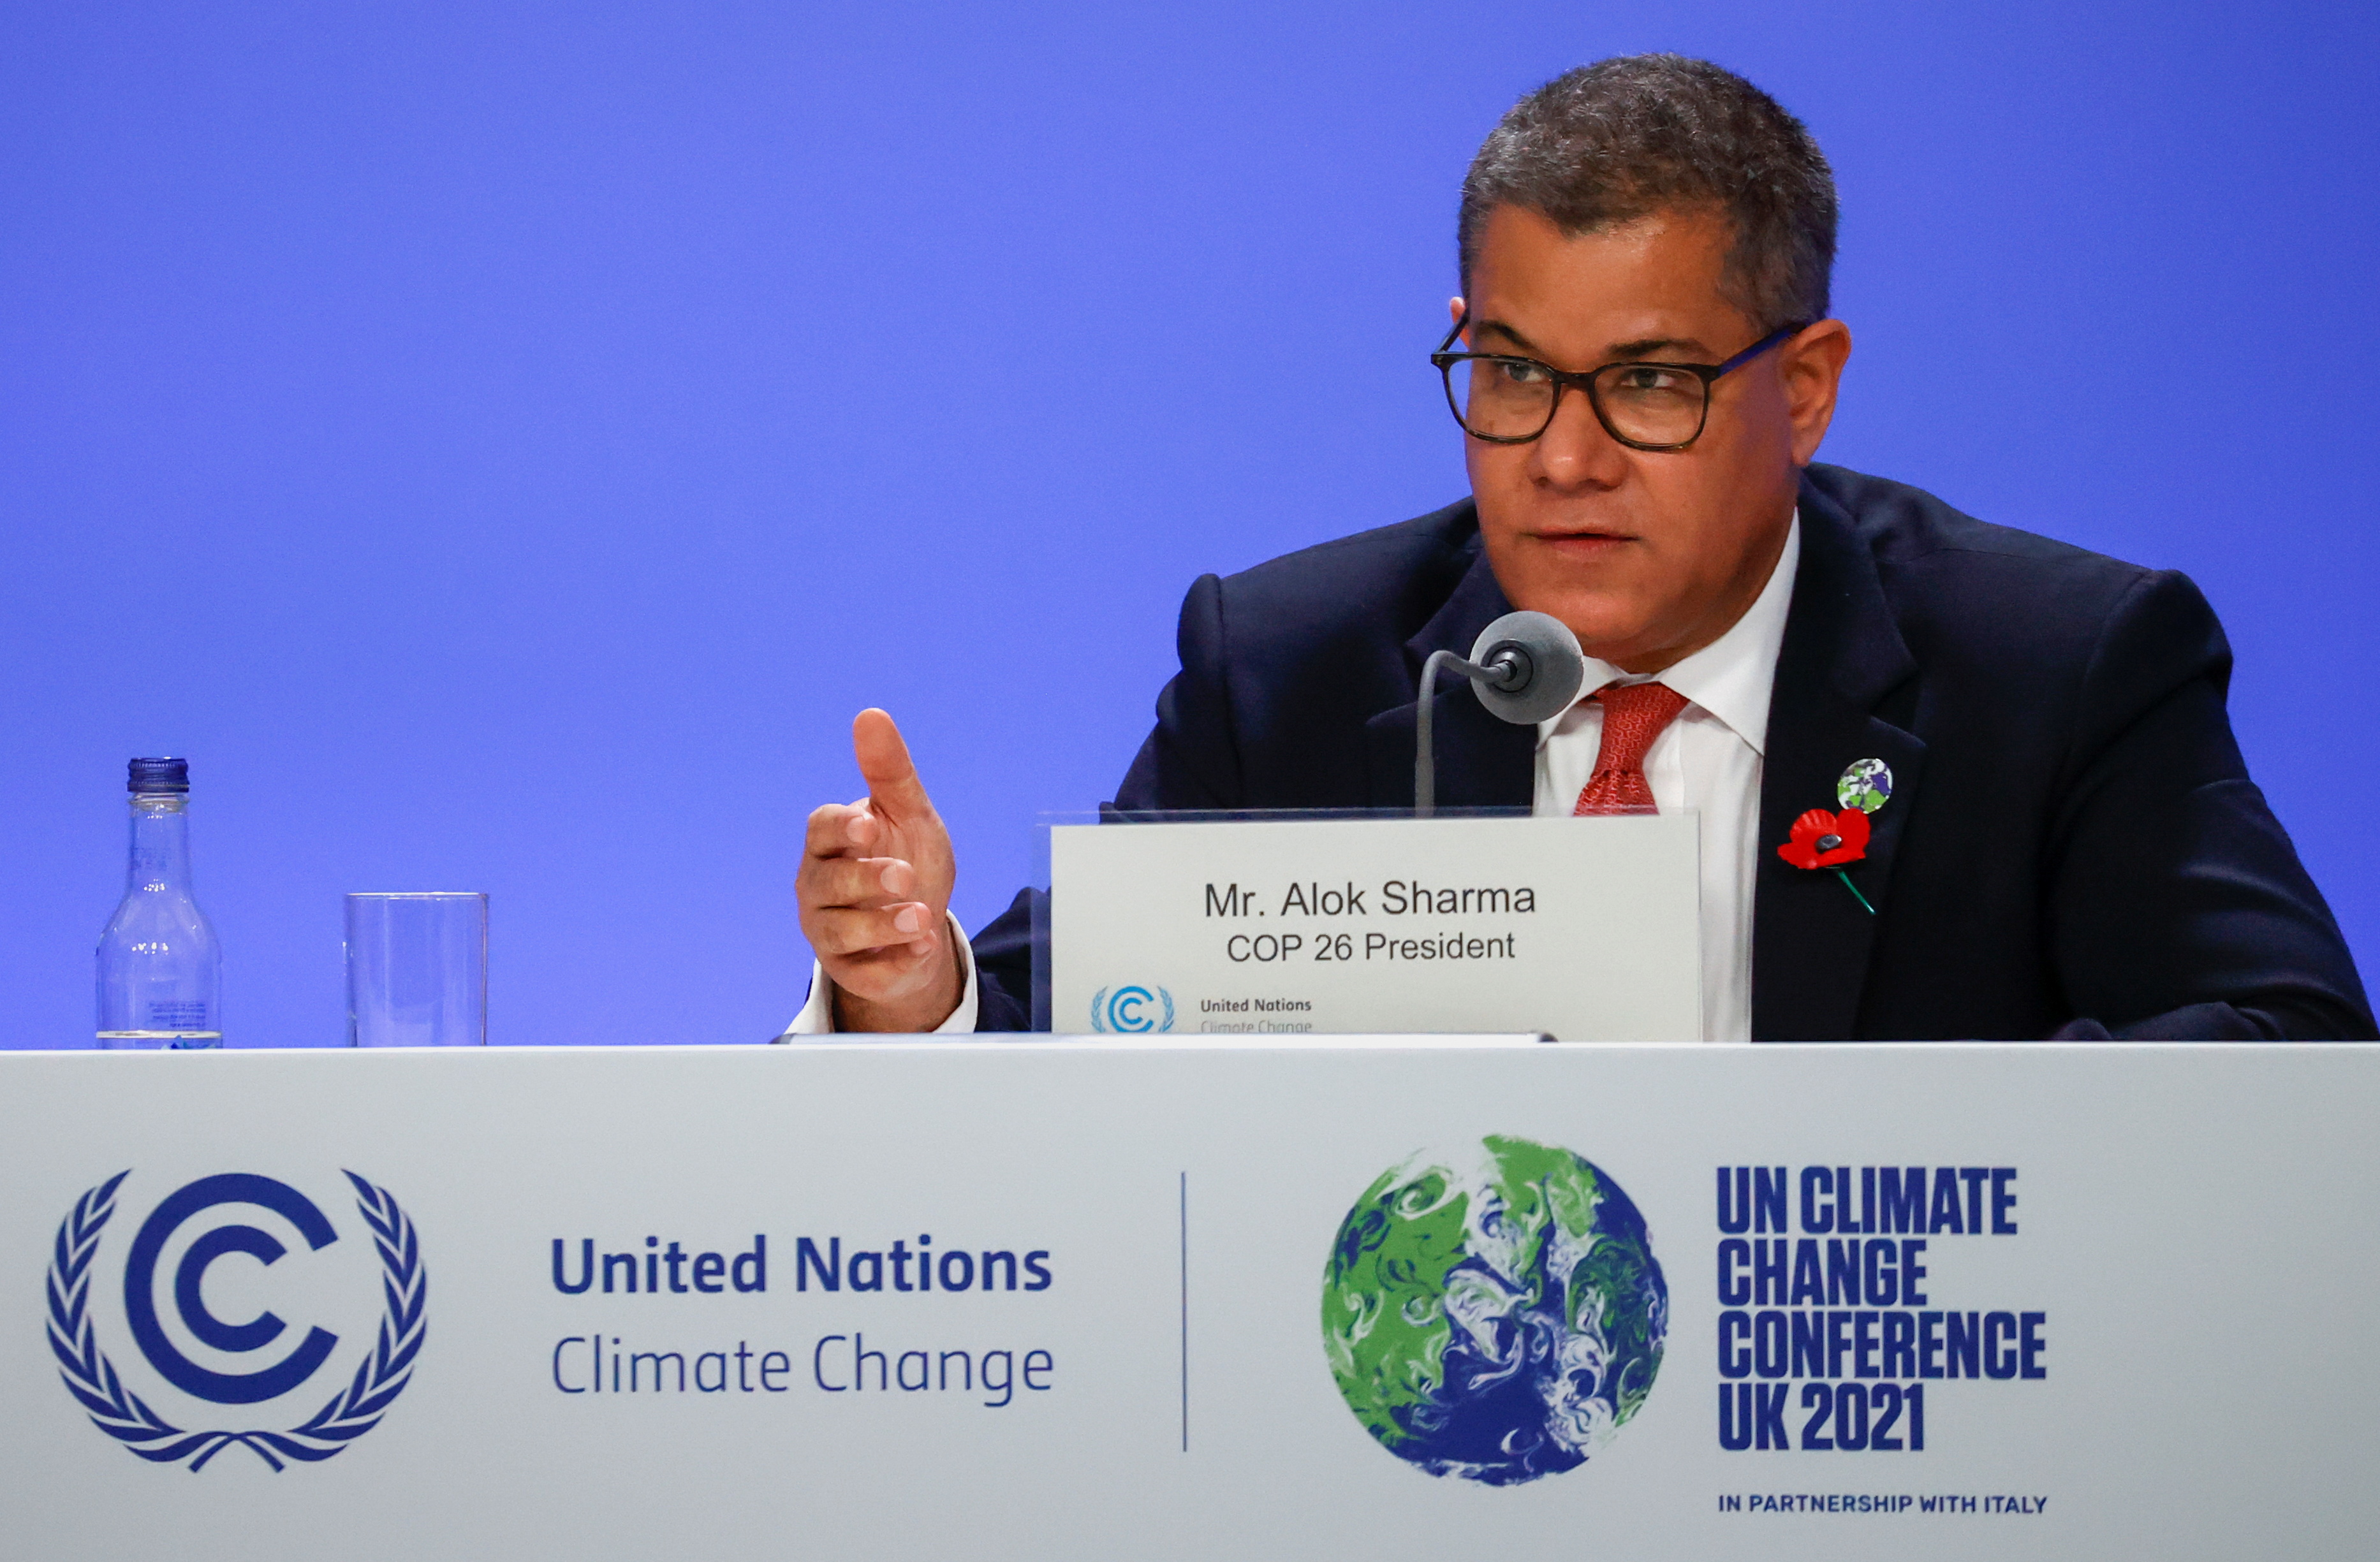 The President of the UN Climate Change Conference (COP26), Alok Sharma, speaks during a COP26 presidency news conference, in Glasgow, Scotland, Britain, November 10, 2021. REUTERS/Phil Noble